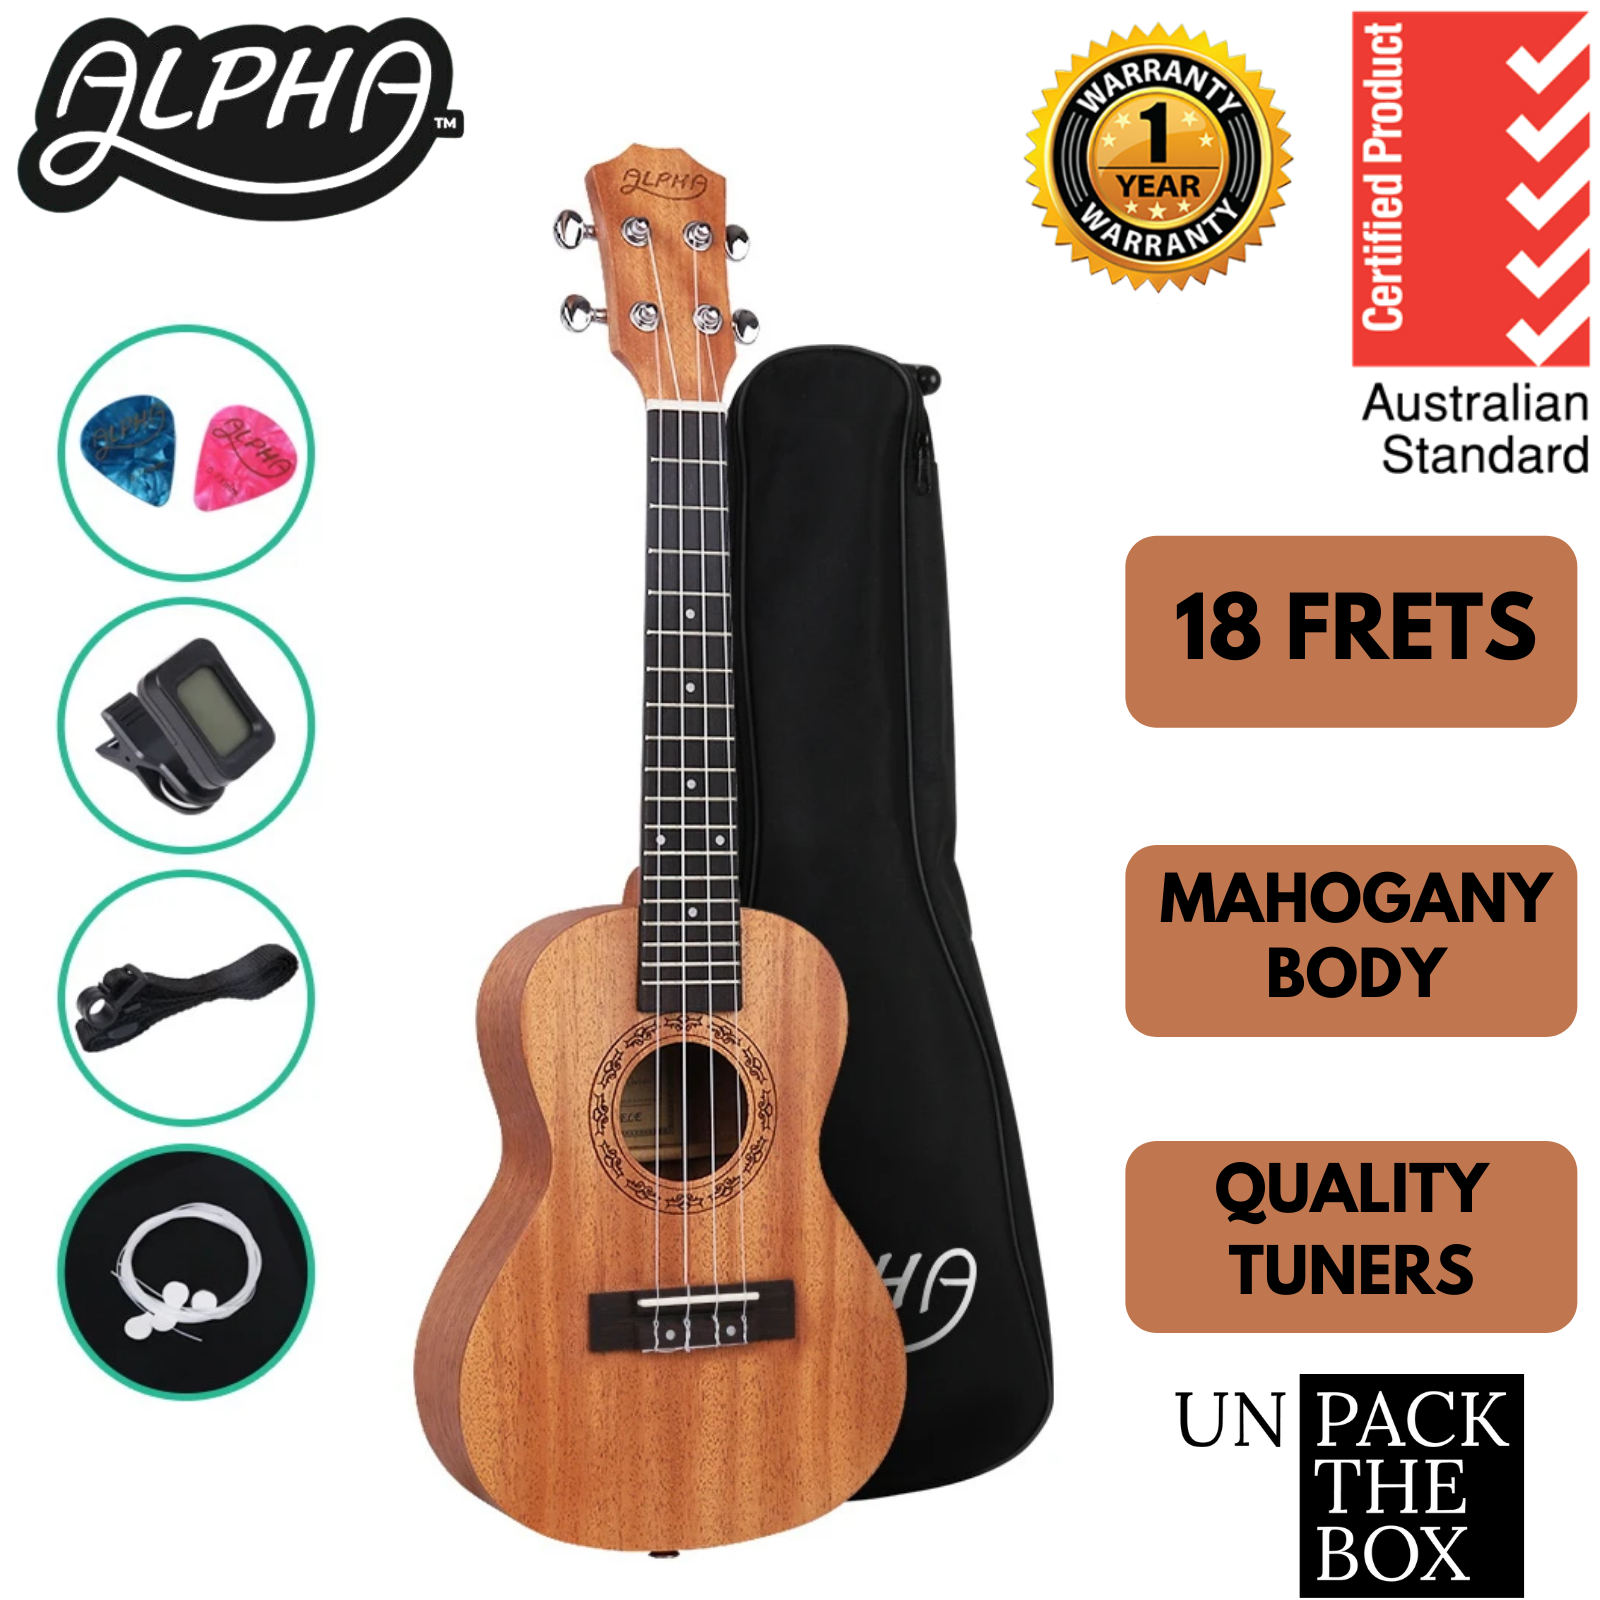 ALPHA Concert Ukulele  is an electric ukelele that has premium feel and great for beginners